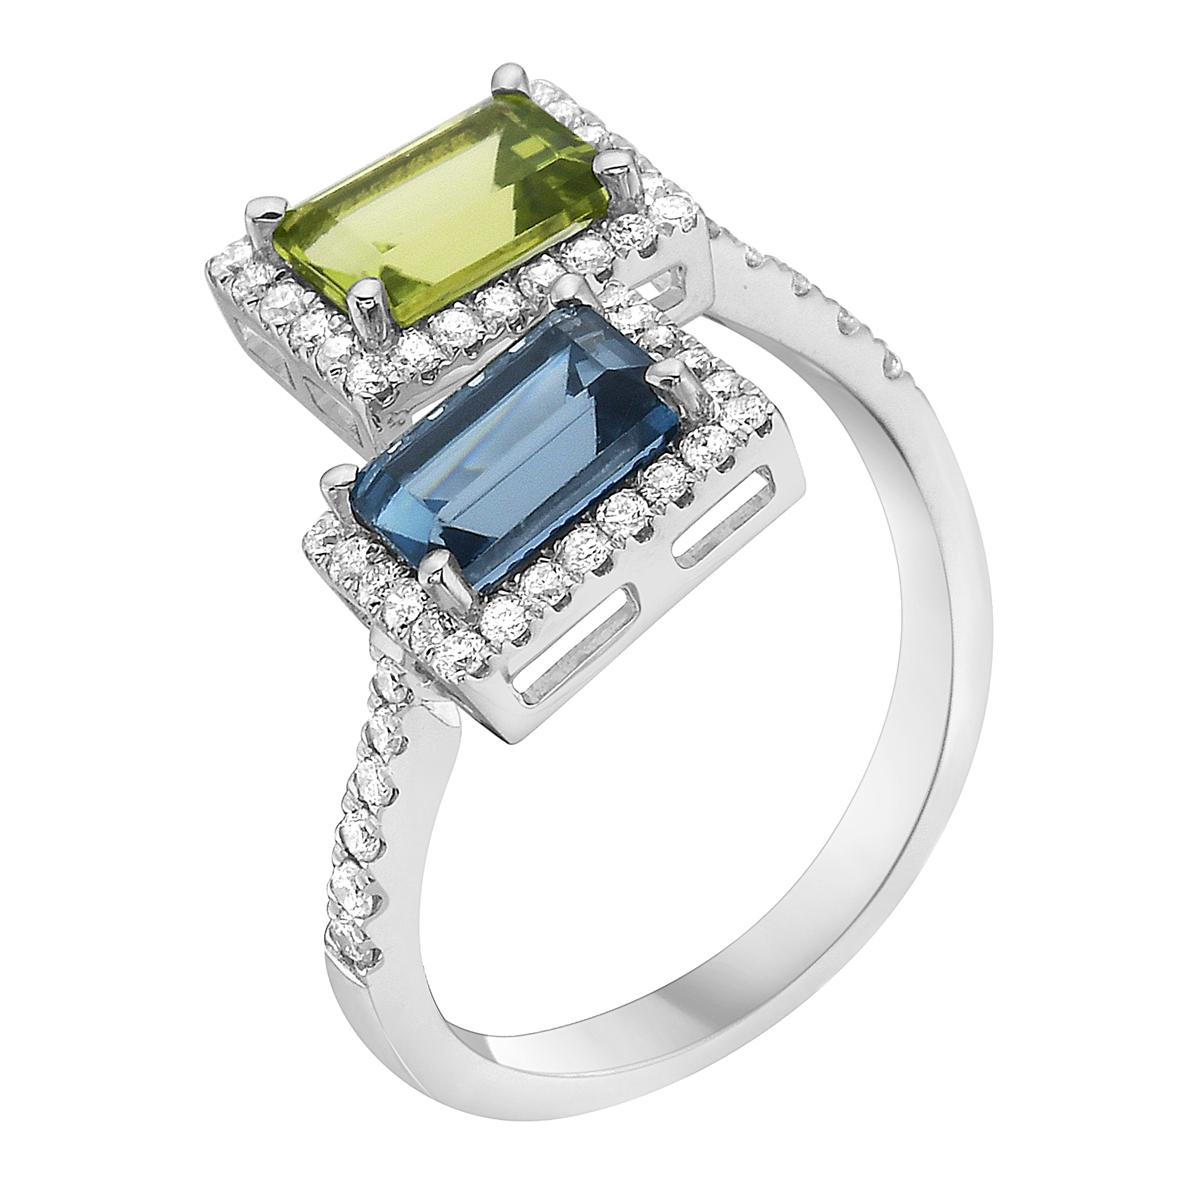 With this exquisite semi-precious London Blue Topaz and Peridot diamond ring, style and glamour are in the spotlight. This 14-karat white gold ring is made from 3.4 grams of gold and one Peridot totaling 1.04 karats as well as one London Blue Topaz